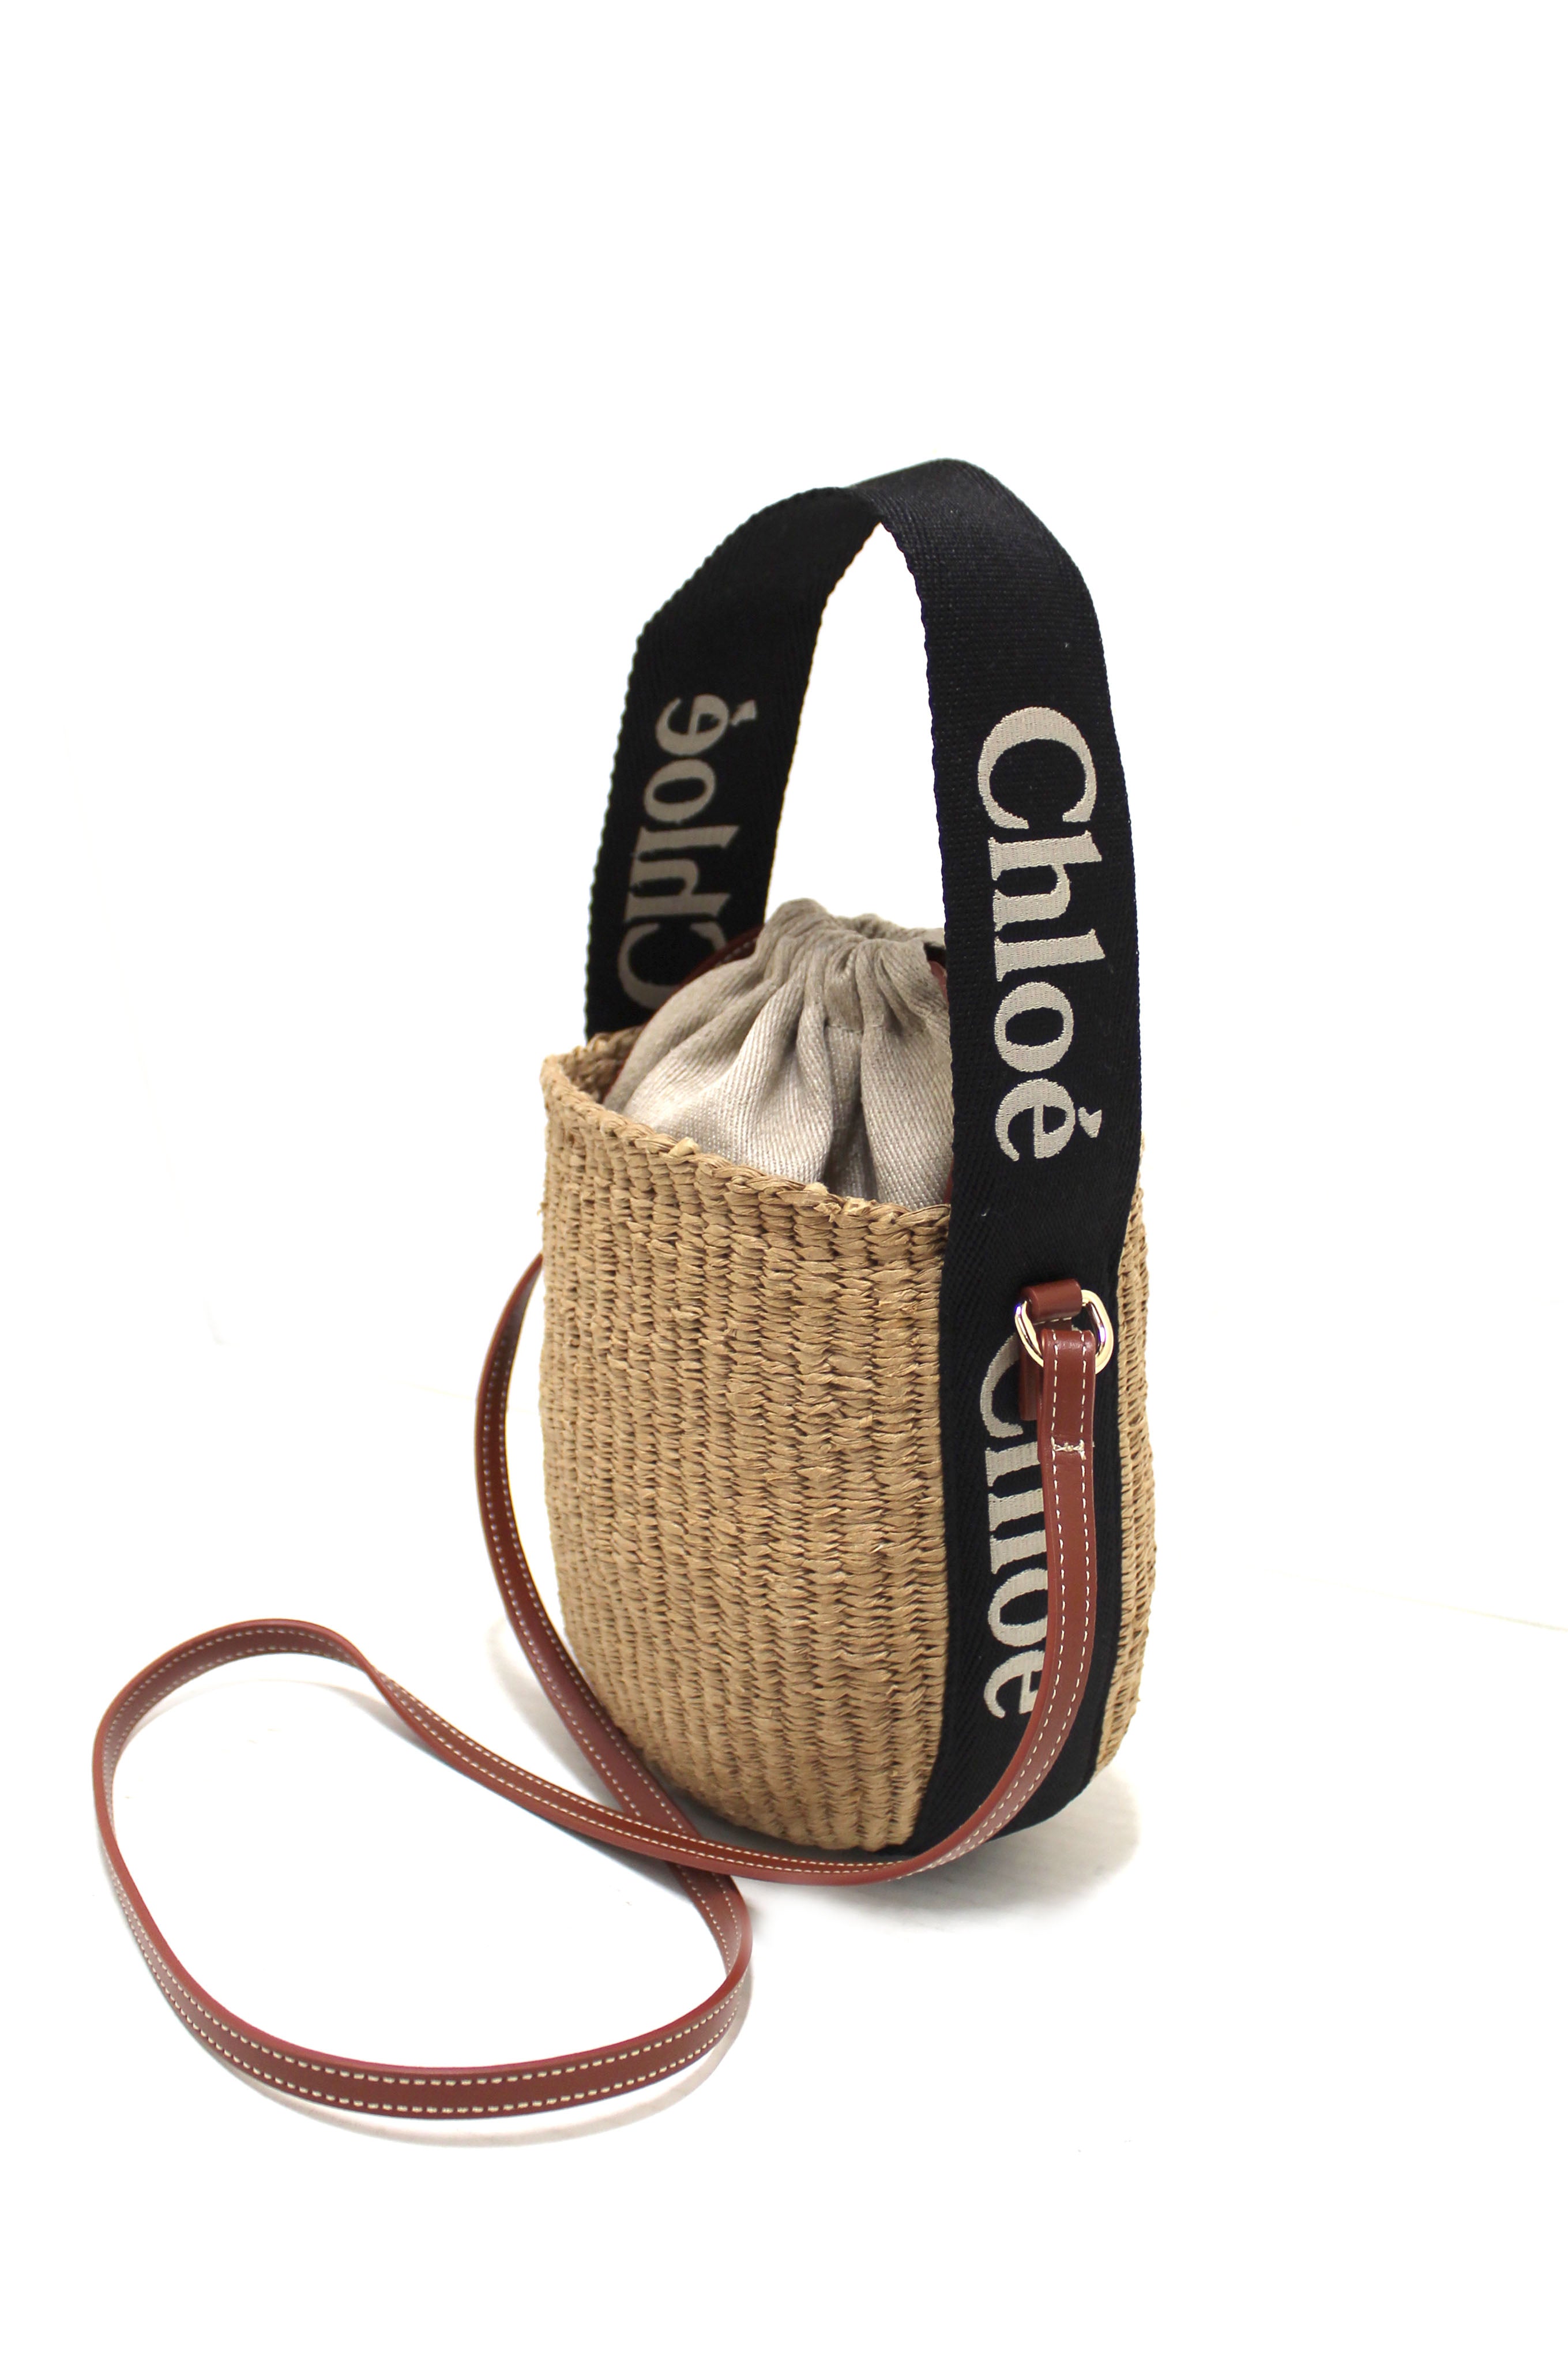 NEW Authentic Chloé Woody Woven with Black Logo Strap Tops Basket Bag